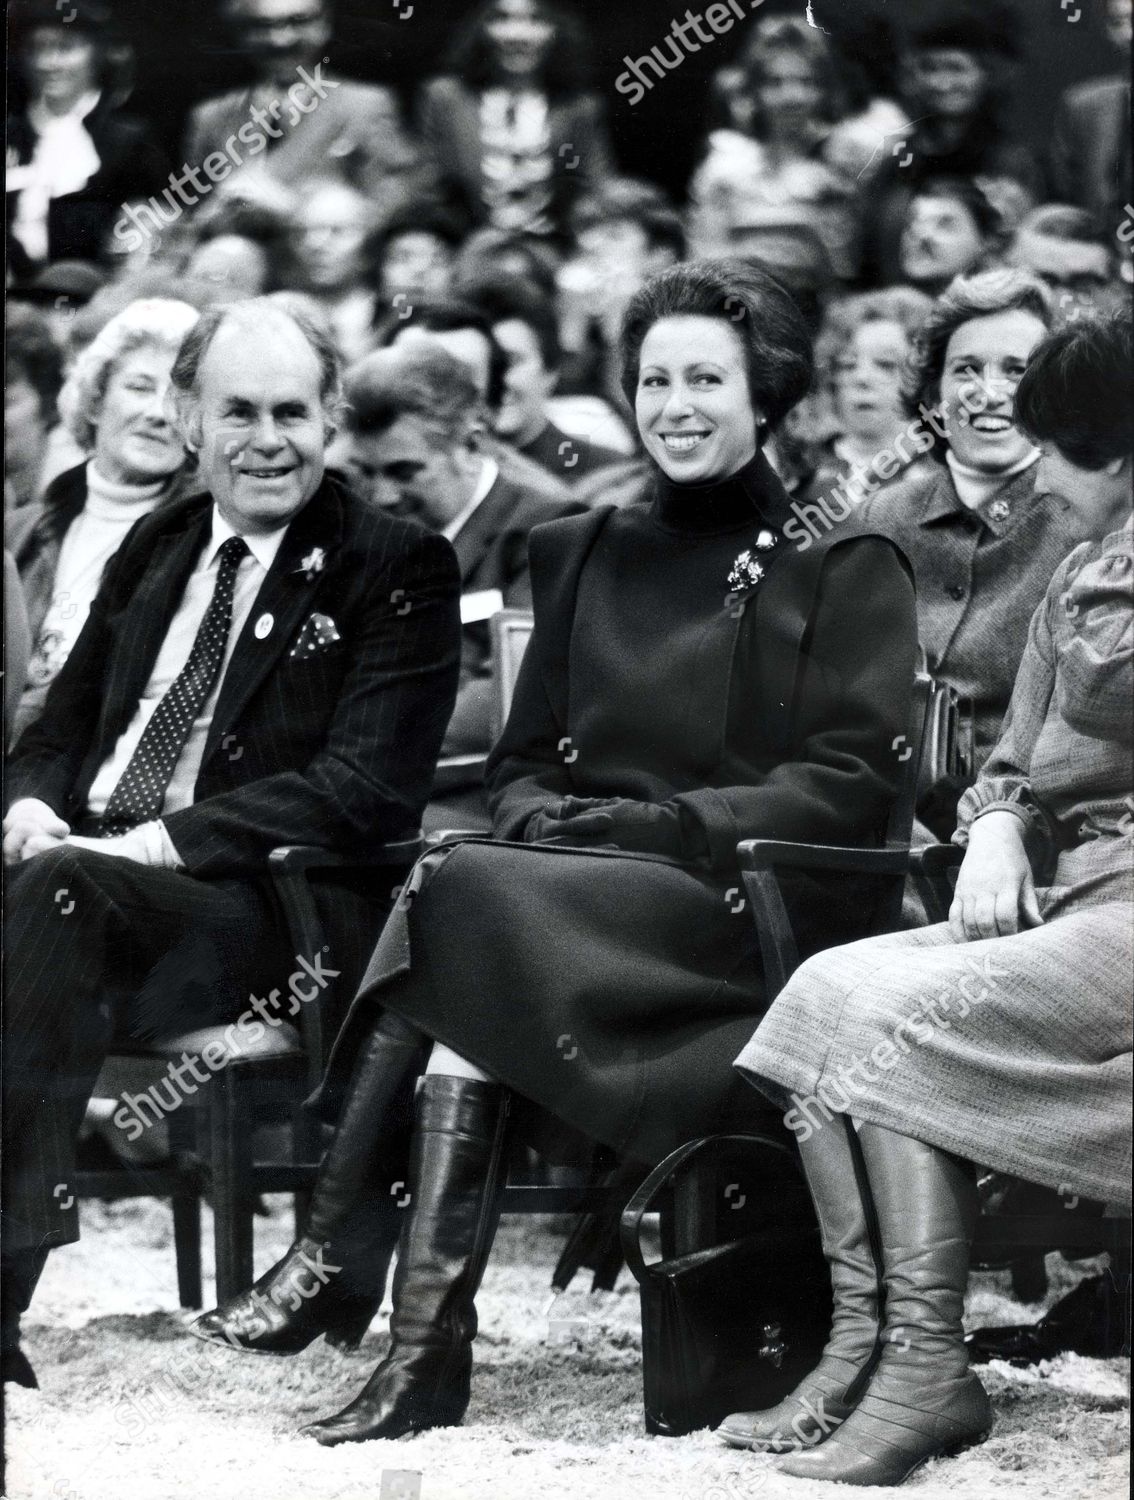 princess-anne-now-princess-royal-1984-picture-shows-princess-anne-at-highwood-riding-school-for-disabled-children-shutterstock-editorial-1043709a.jpg